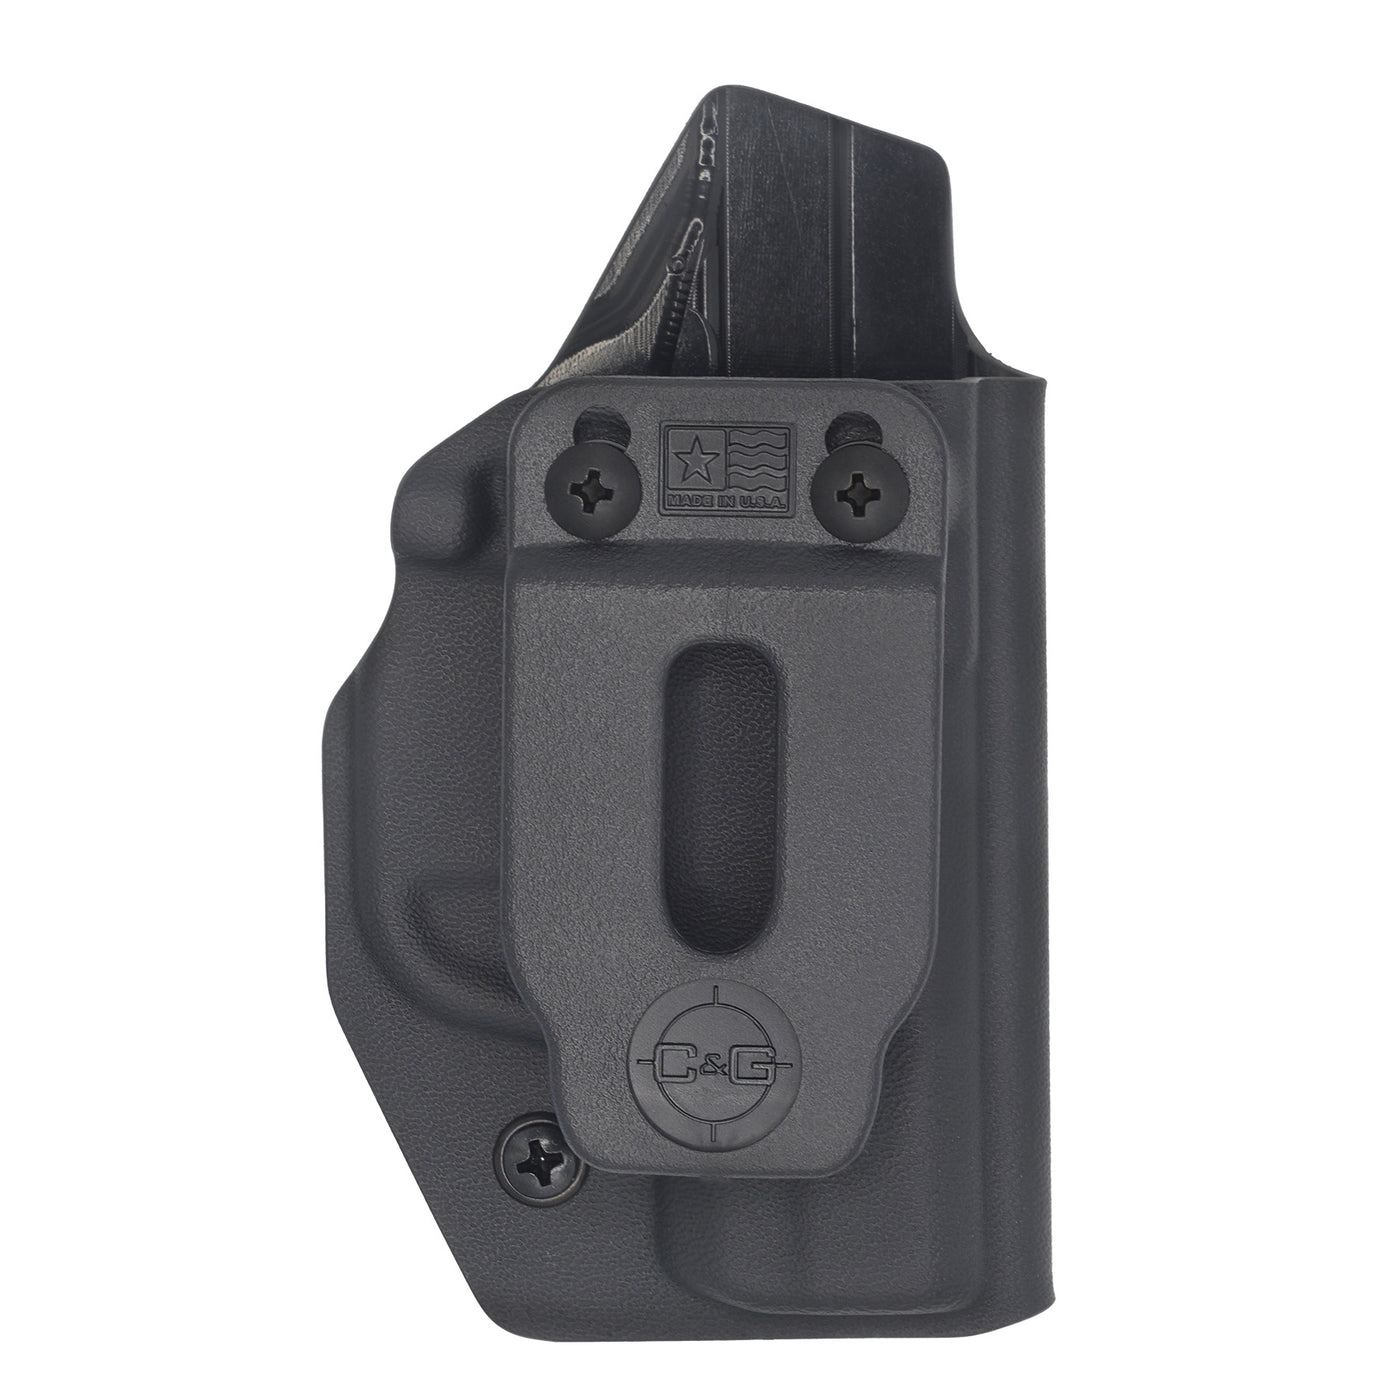 C&G Holsters custom Covert IWB kydex holster for LCPII LCP2 Right Hand